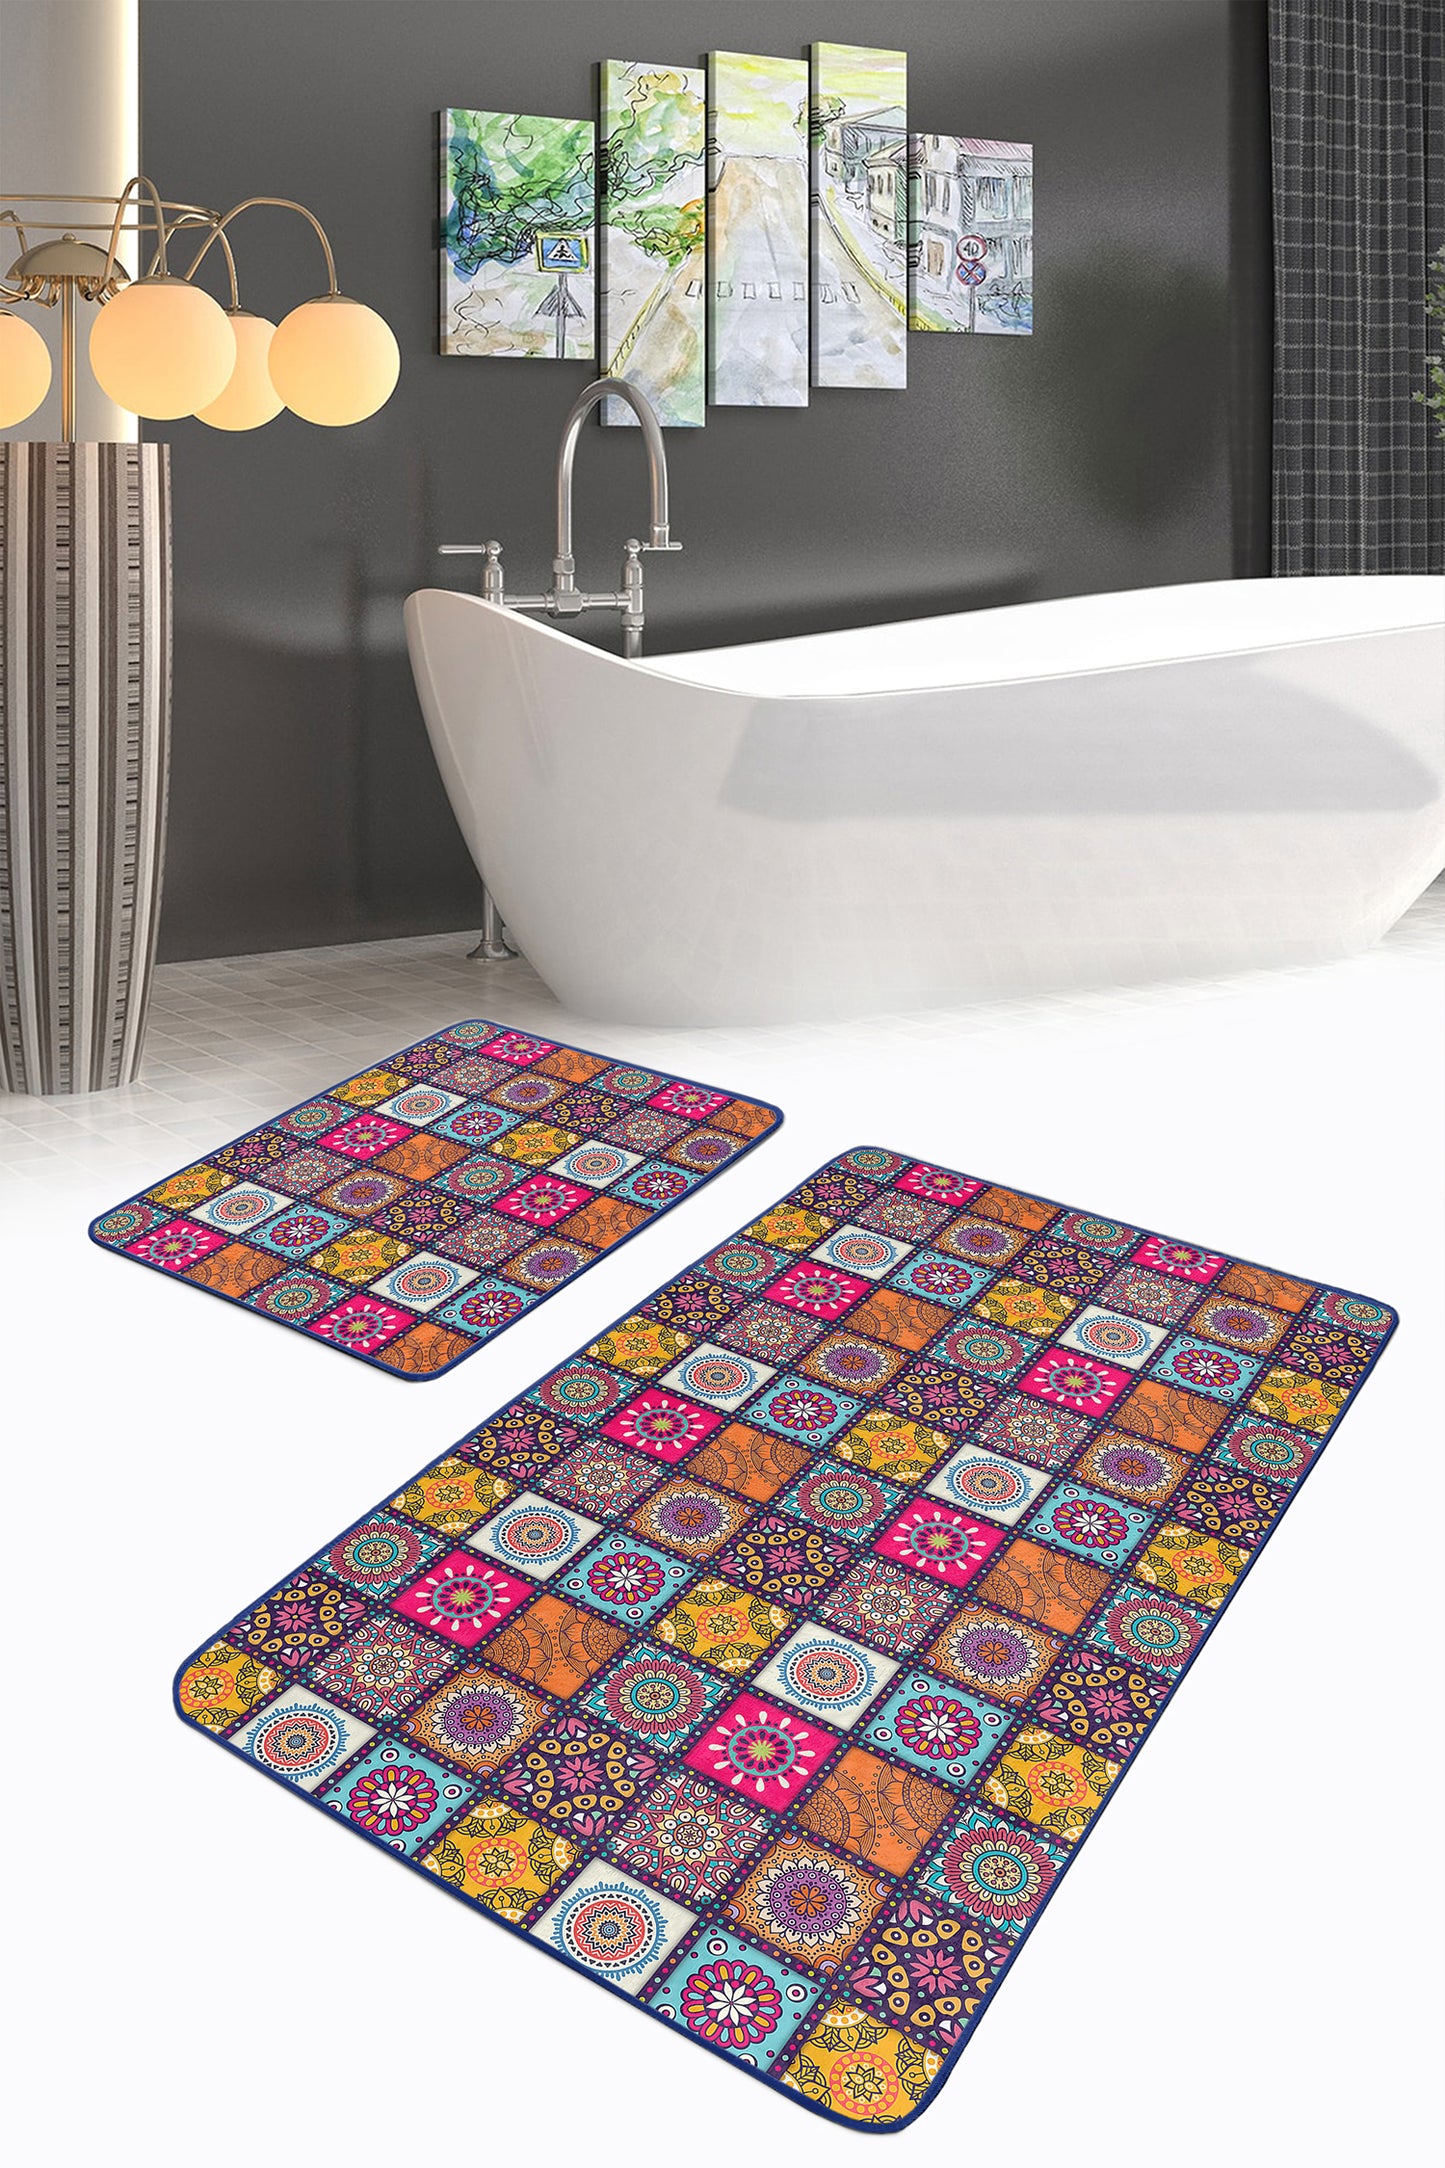 Classic Bathroom Mat Collection with Timeless Patterns